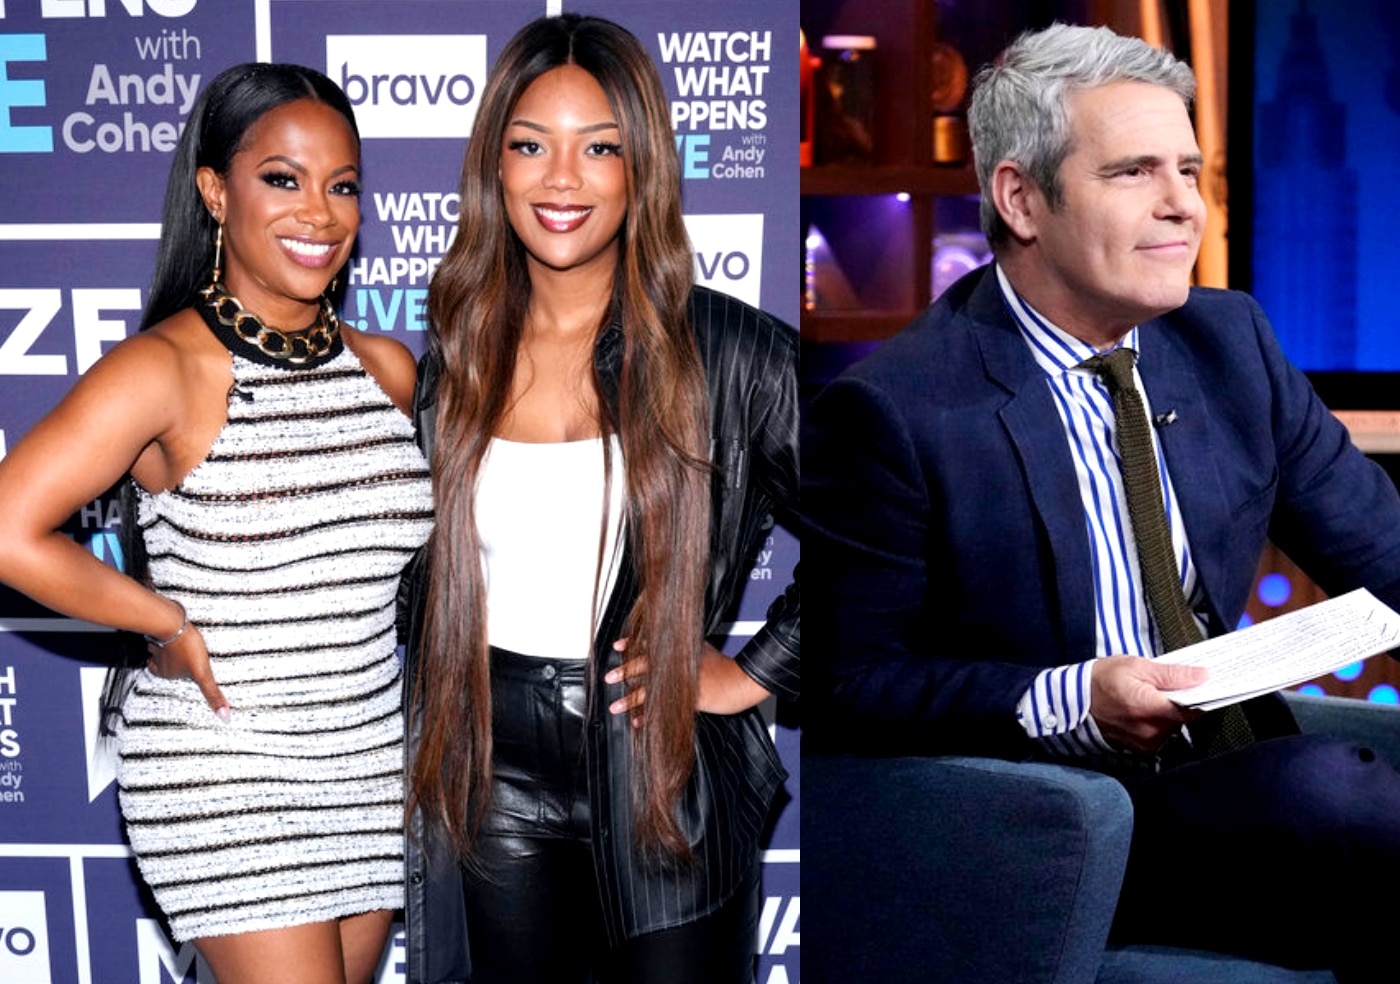 RHOA Star Kandi Burruss is Upset With Andy Cohen Question to Daughter Riley Burruss on Watch What Happens Live, Plus Live Viewing Thread